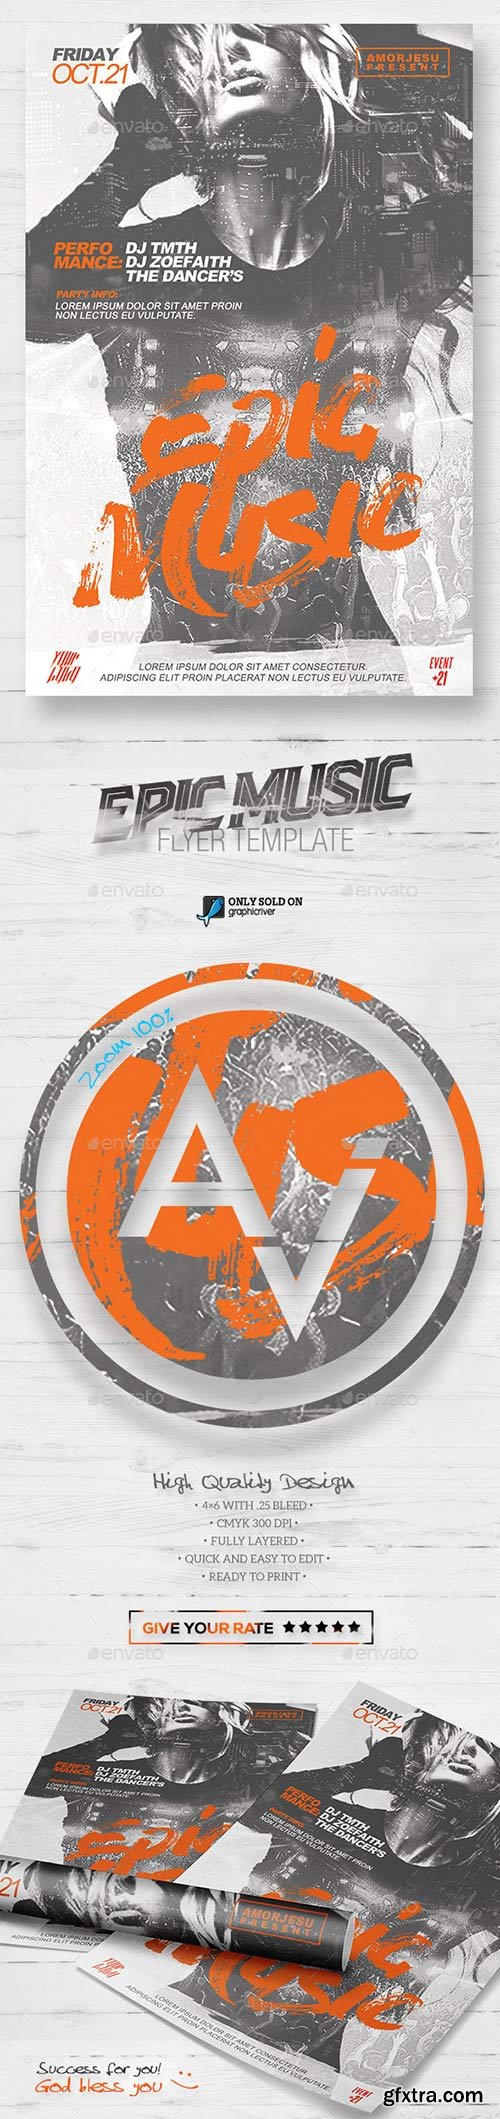 Graphicriver - Epic Music Flyer Template V2 16149445